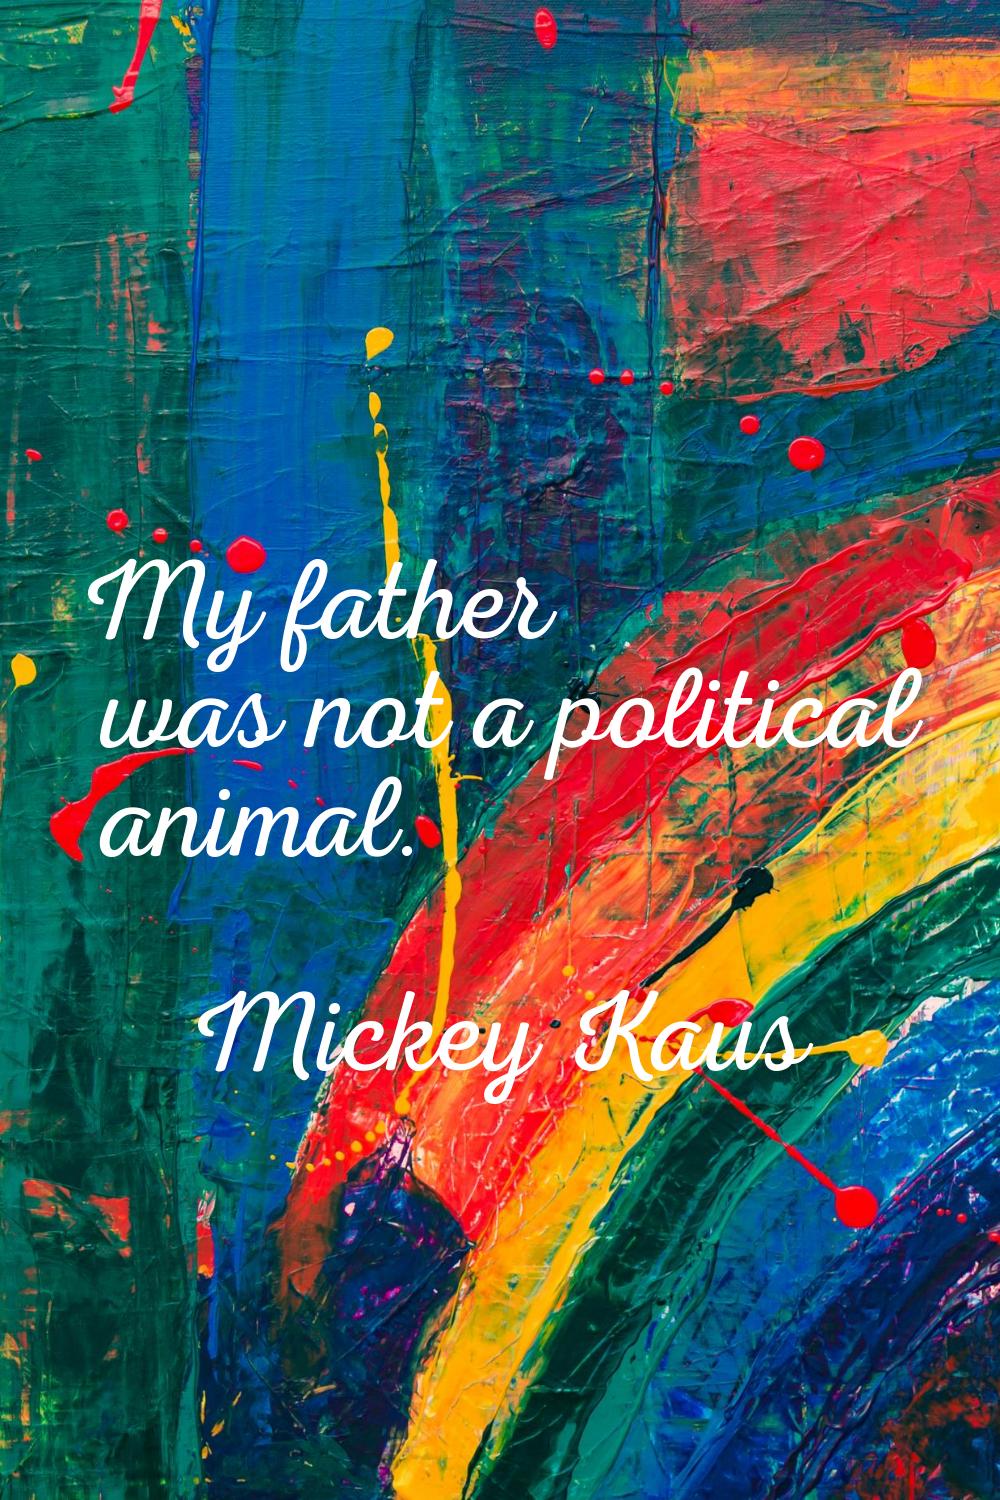 My father was not a political animal.